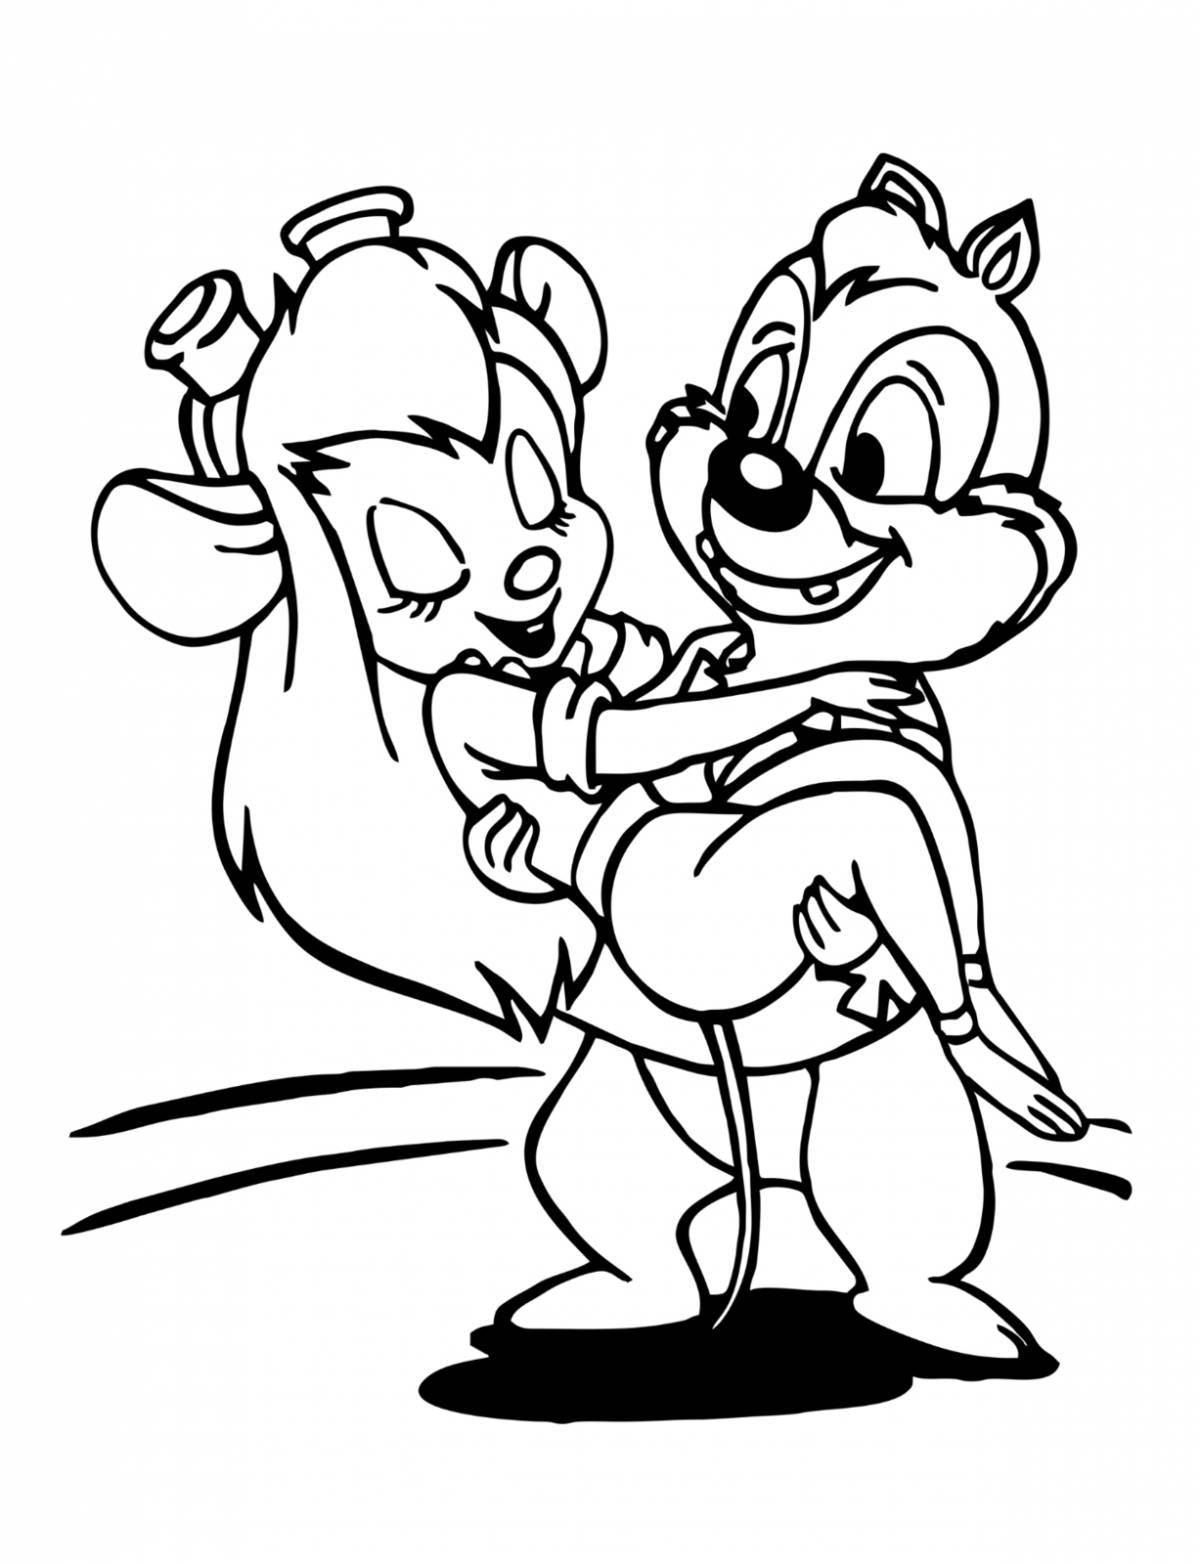 Energetic chipmunks chip and dale